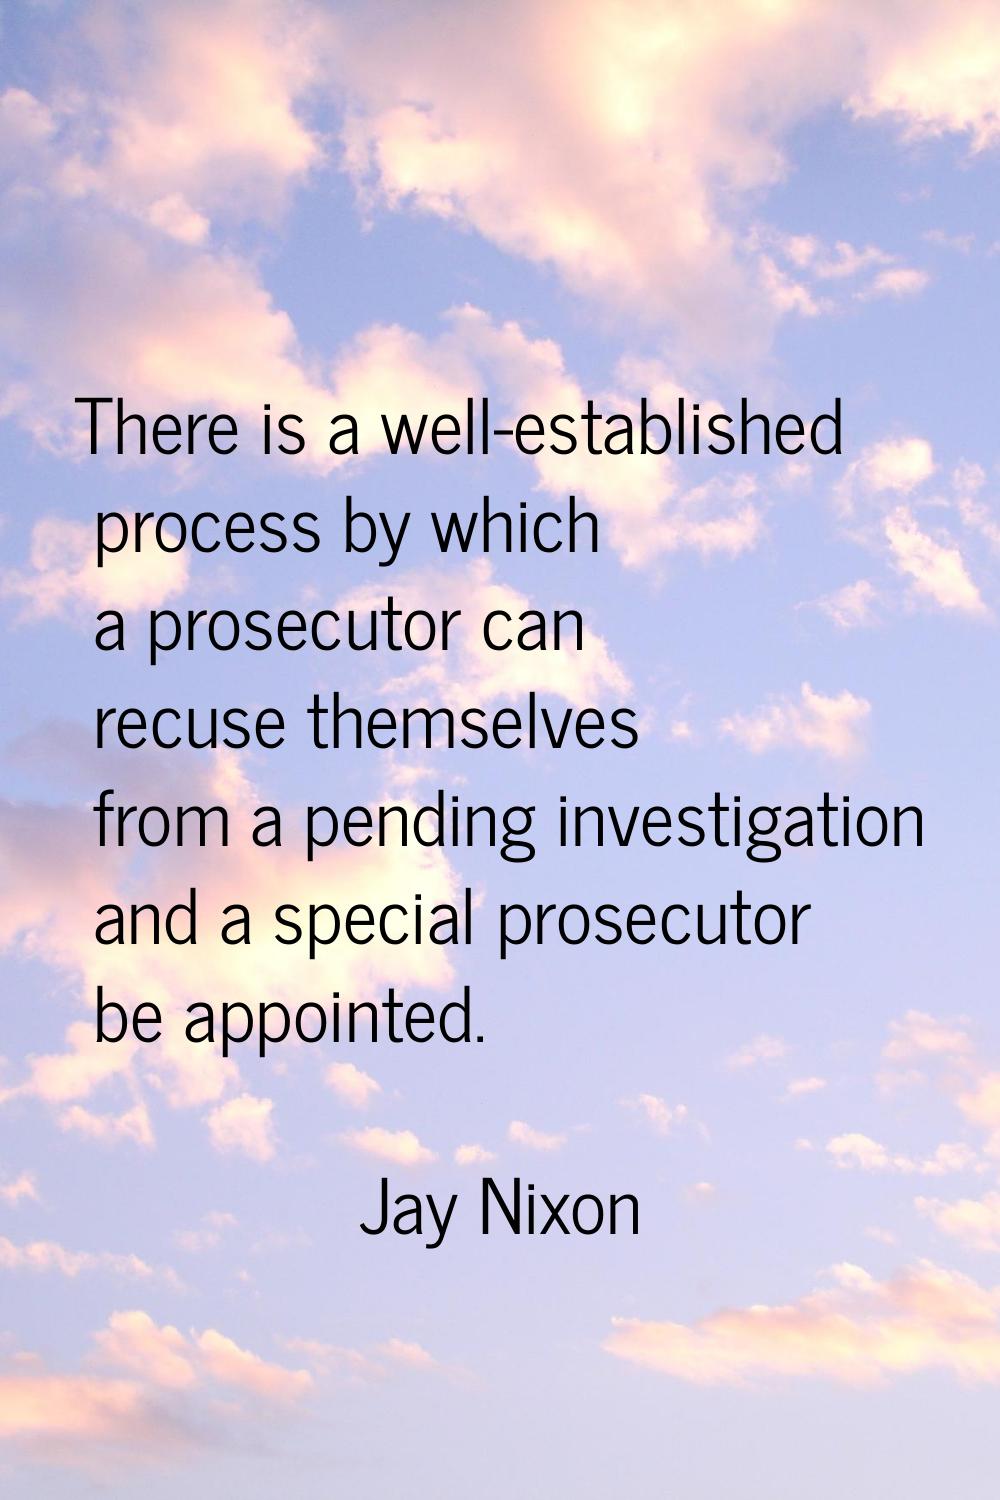 There is a well-established process by which a prosecutor can recuse themselves from a pending inve